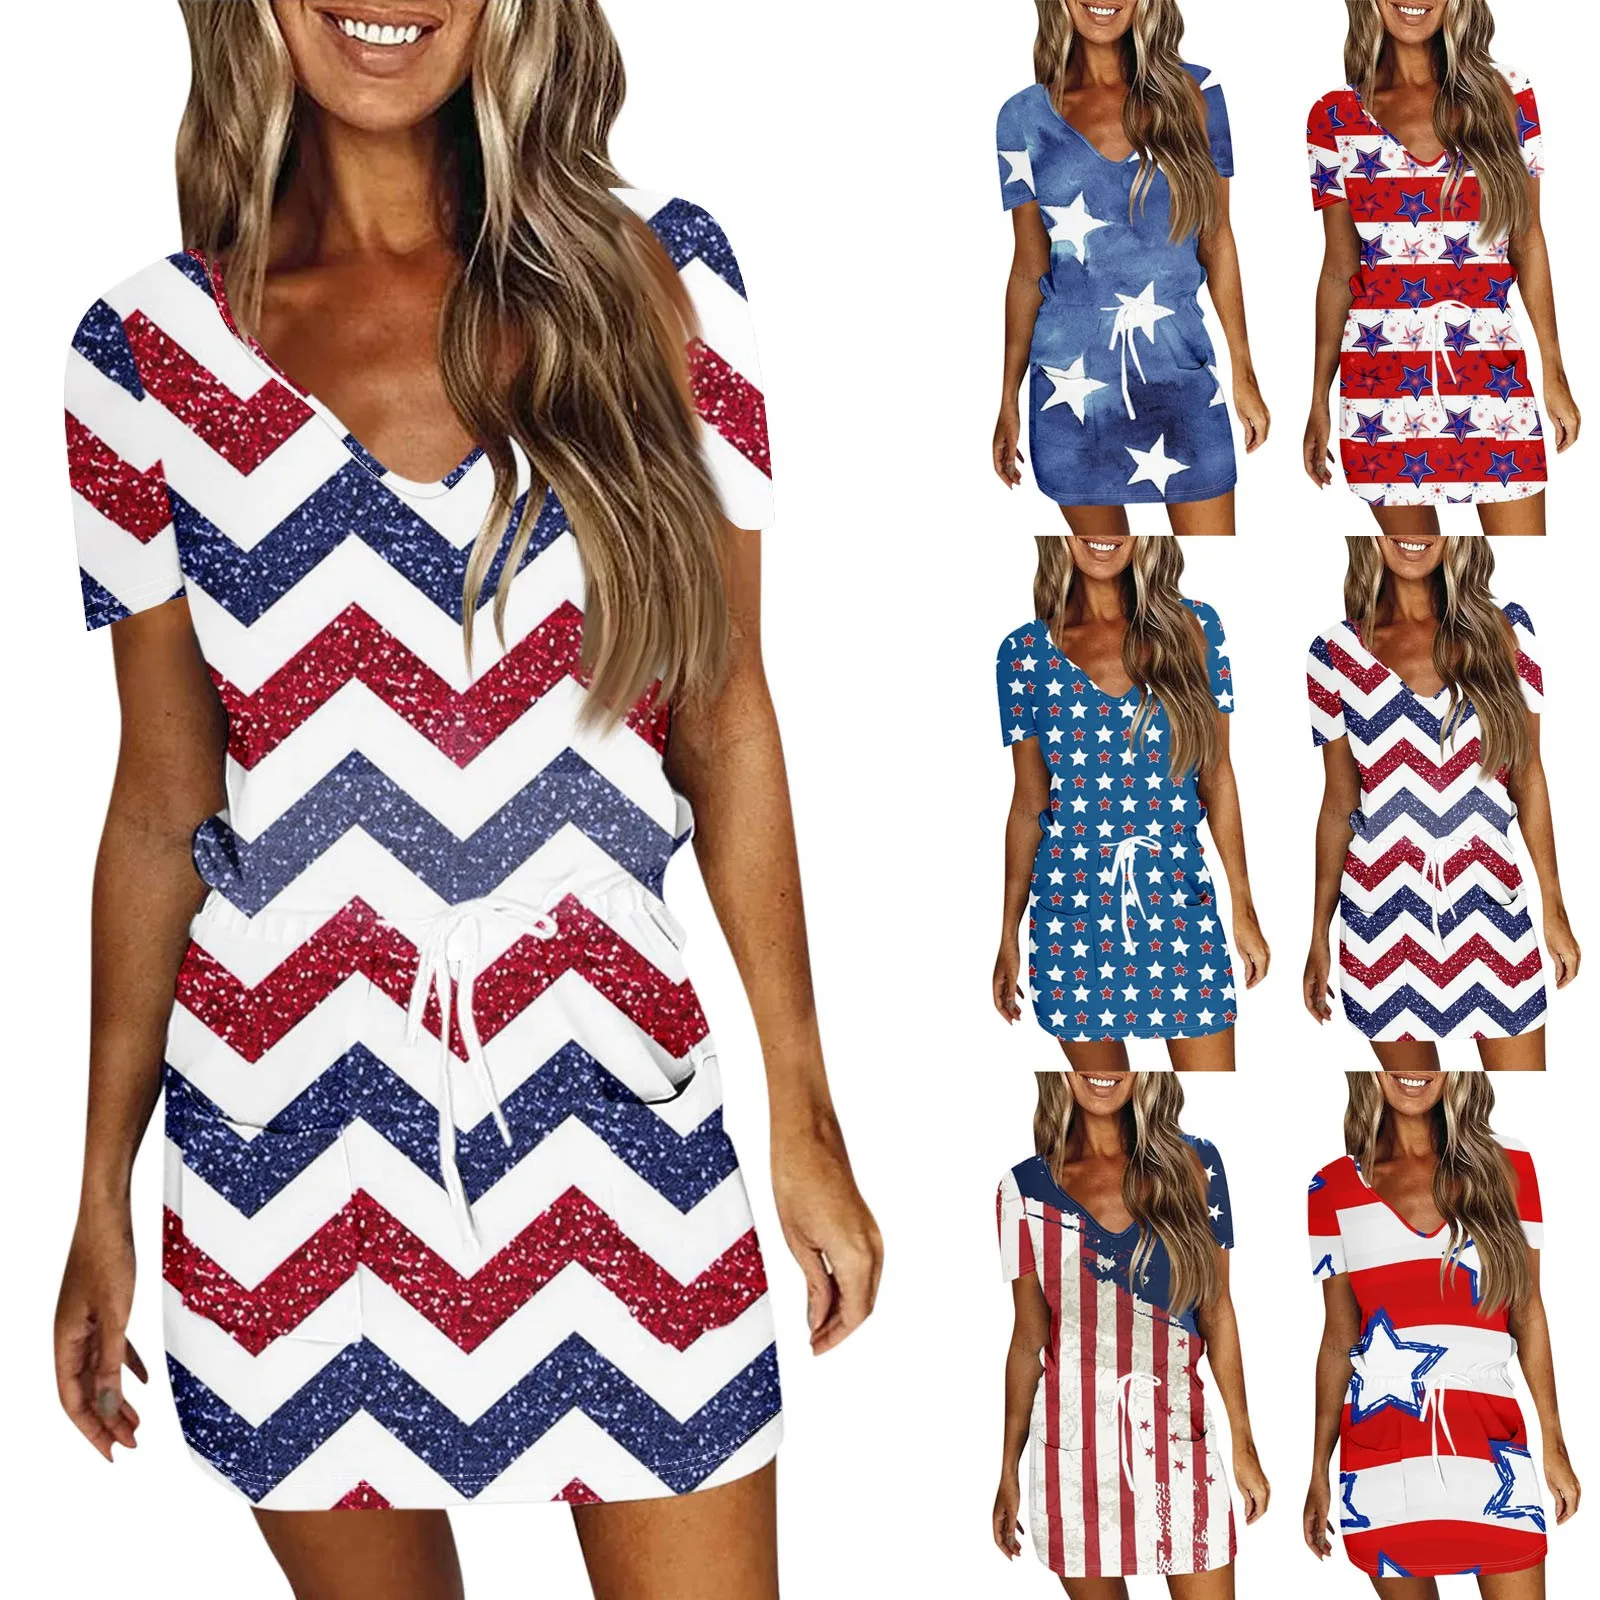 

Women's Summer Dresses Casual Fashion Independence Day Printed Dresses Drawstring V Neck Short Sleeve Dress فساتين طويلة